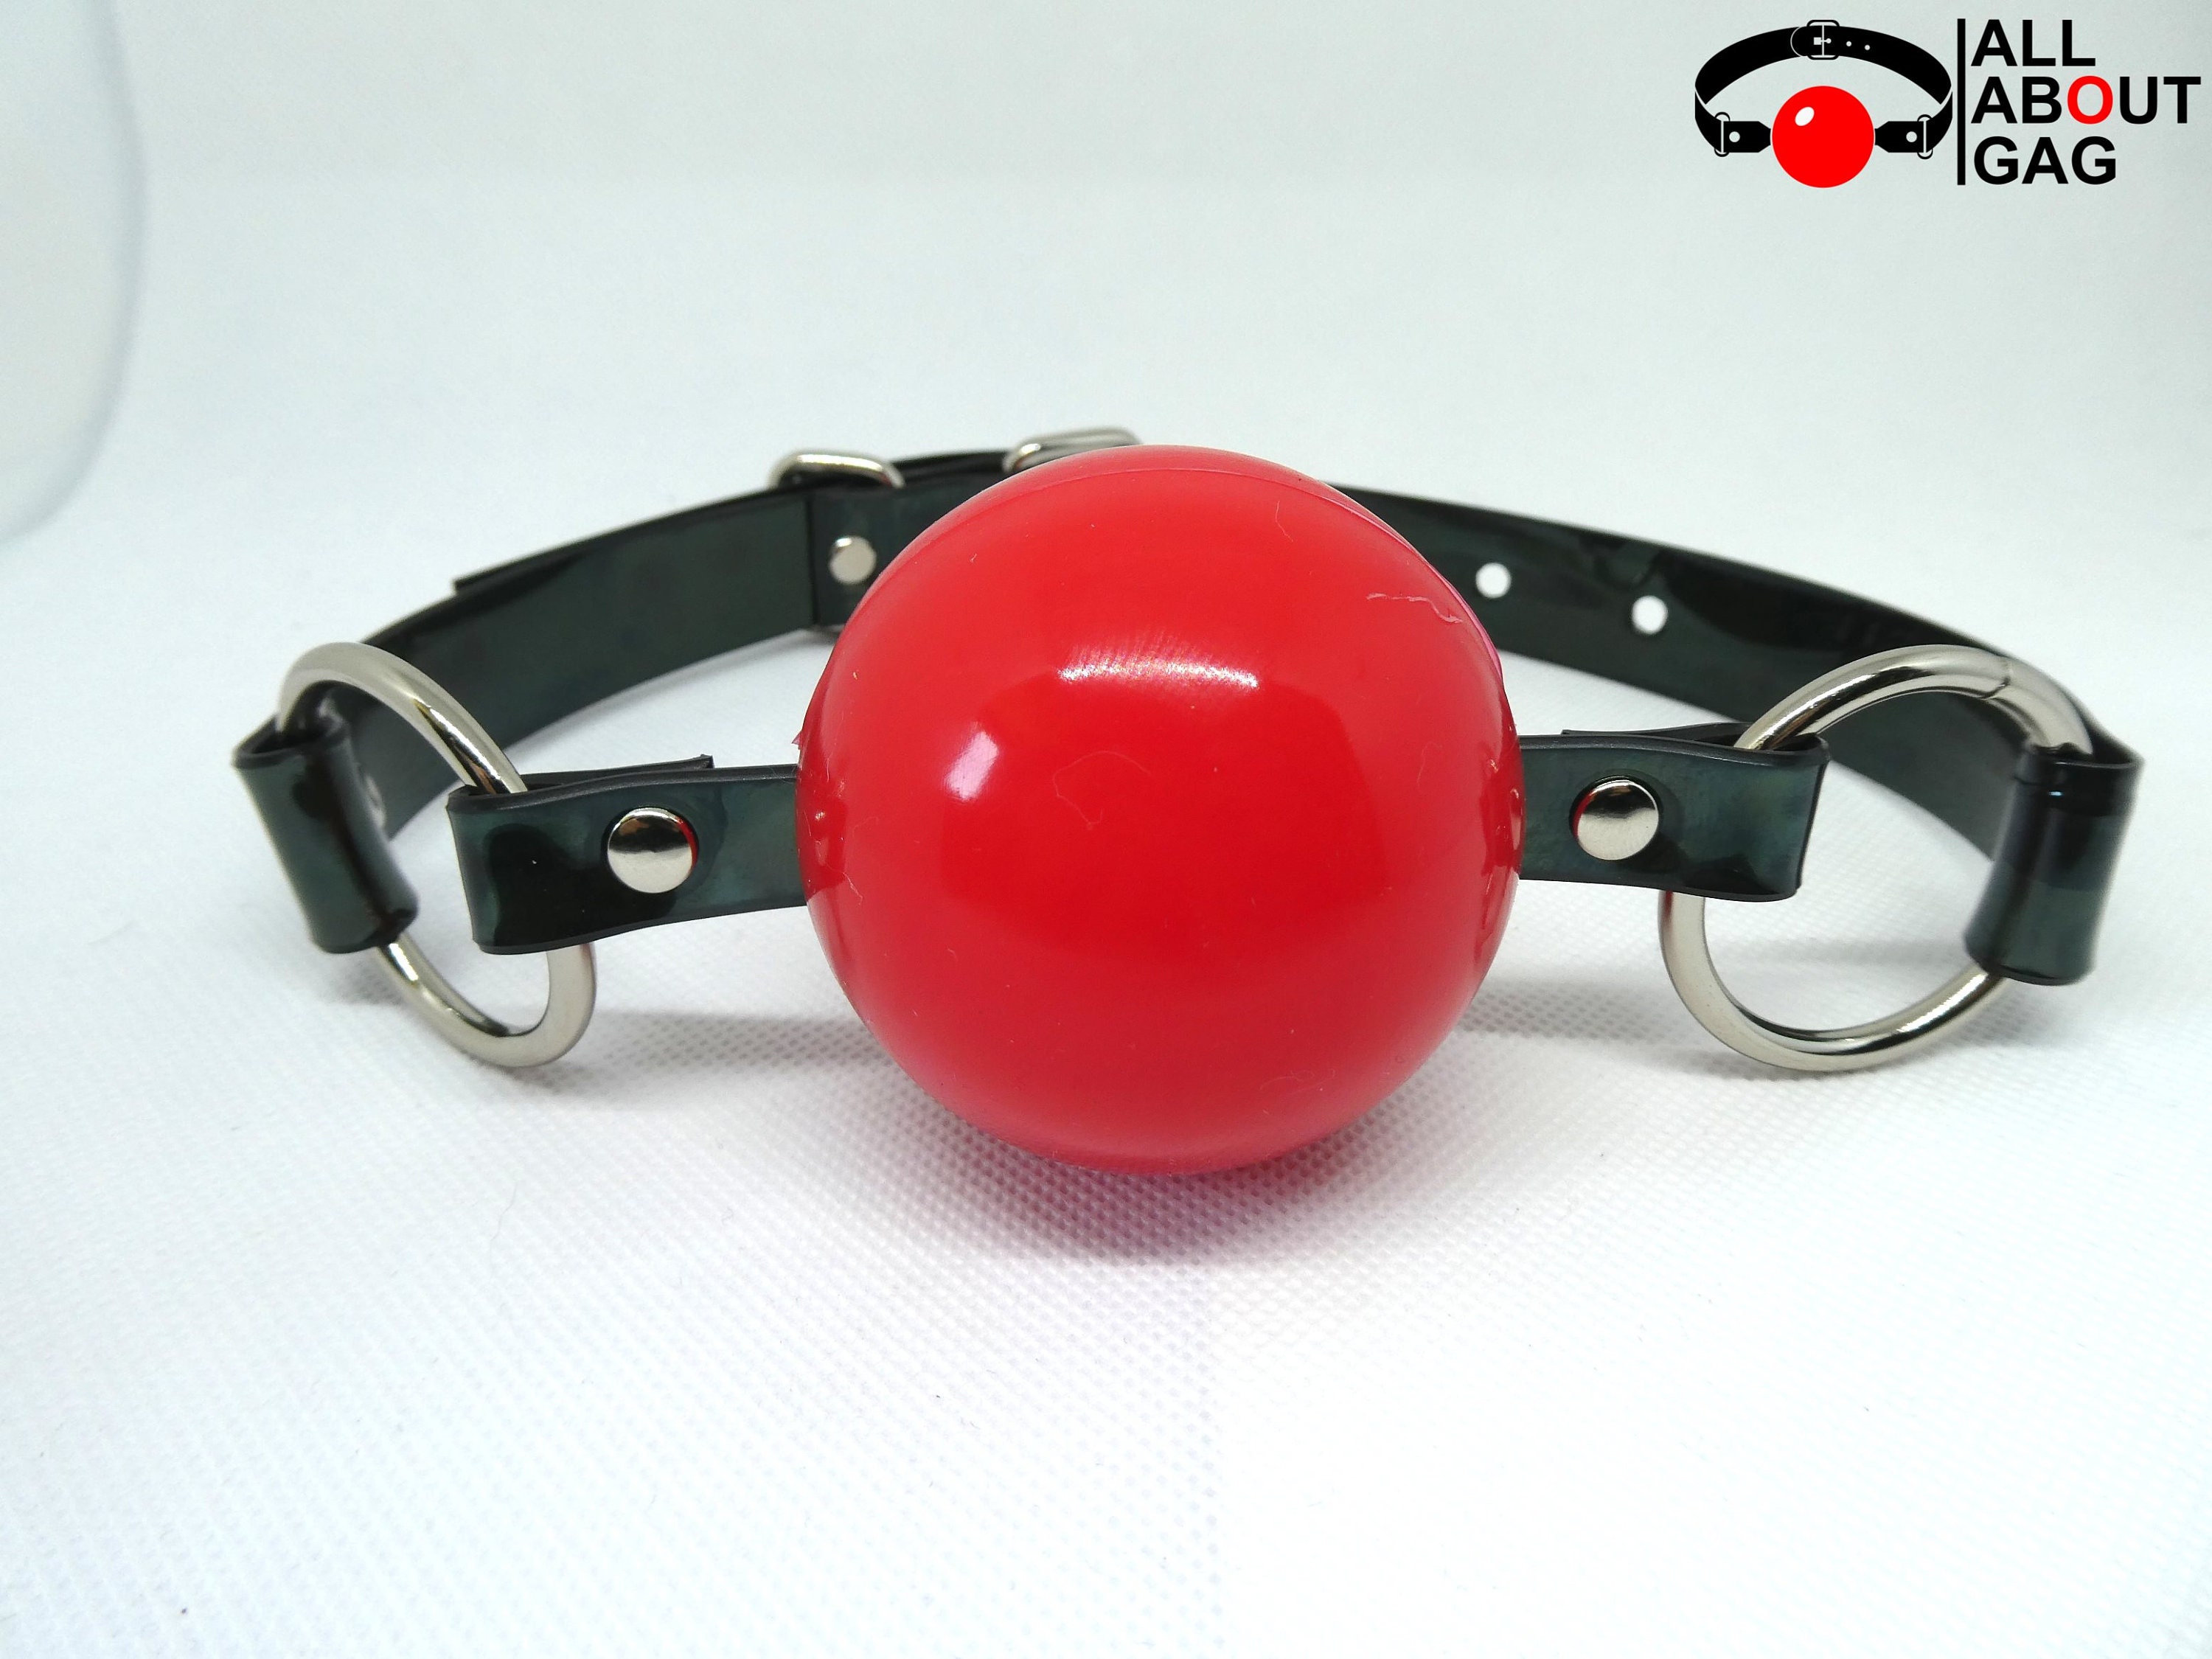 beverly sherwood recommends Big Ball Gag